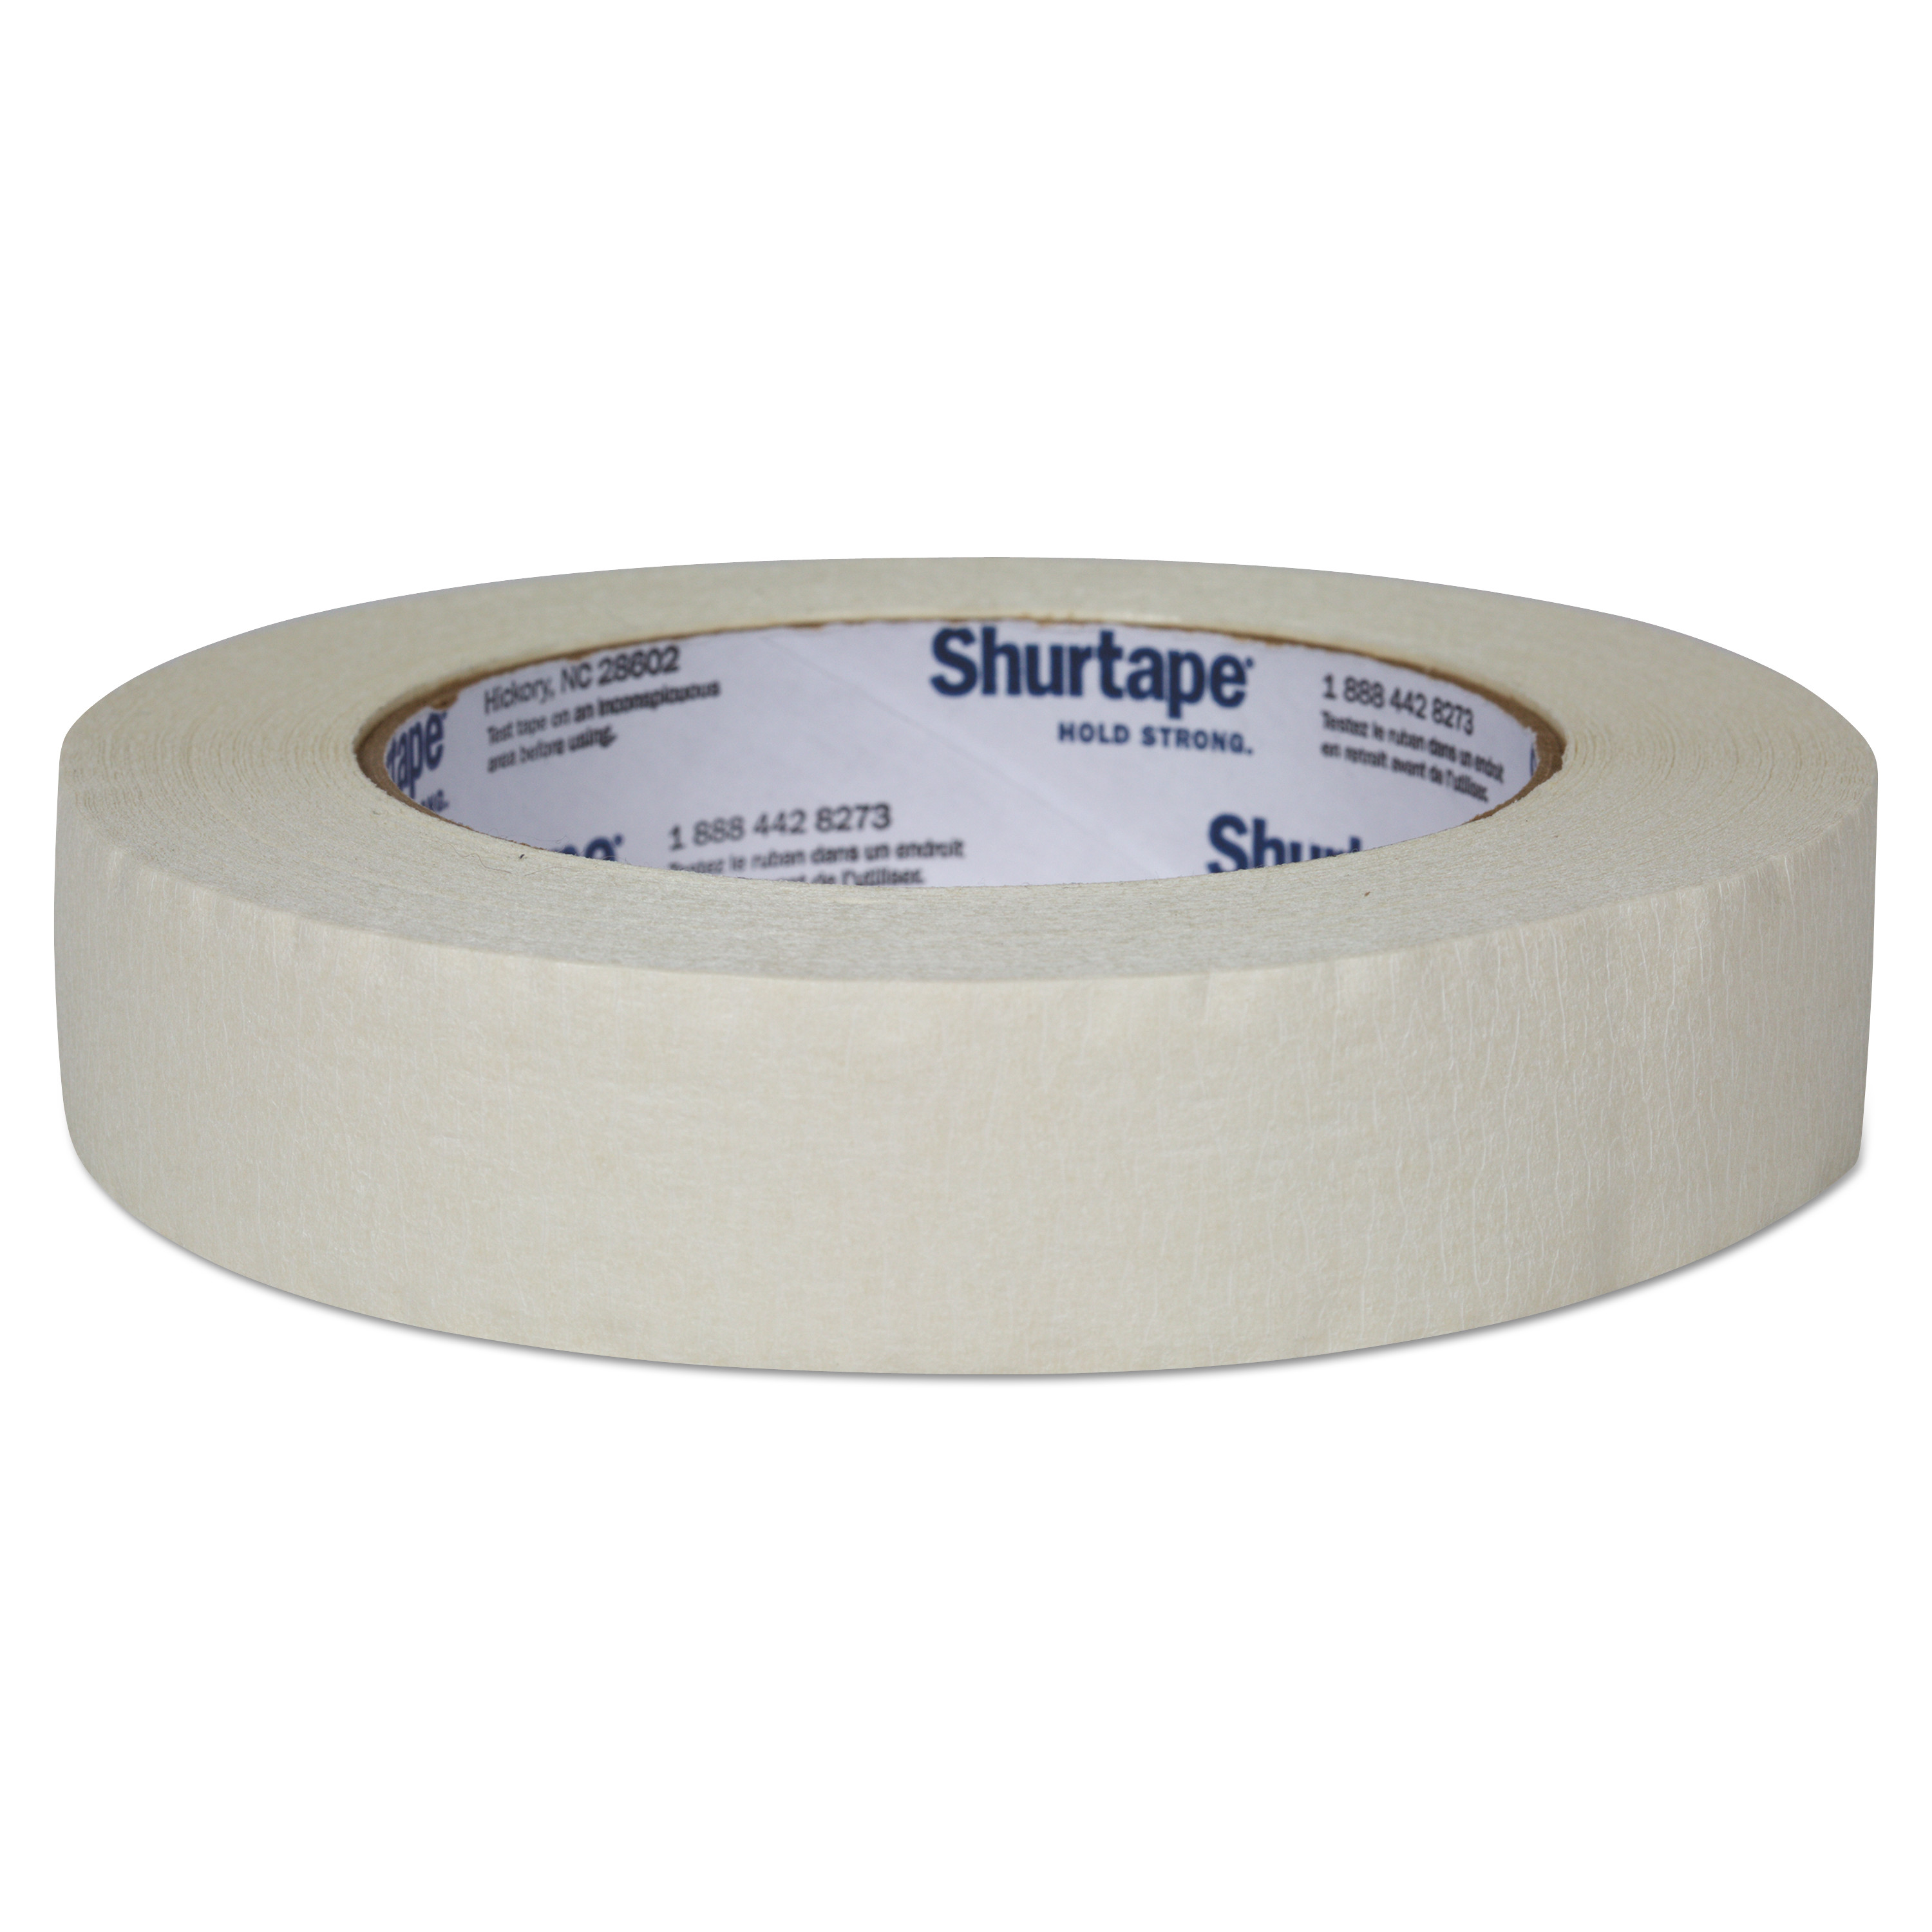  Duck 240573 Color Masking Tape, 3 Core, 0.94 x 60 yds, White (DUC240573) 